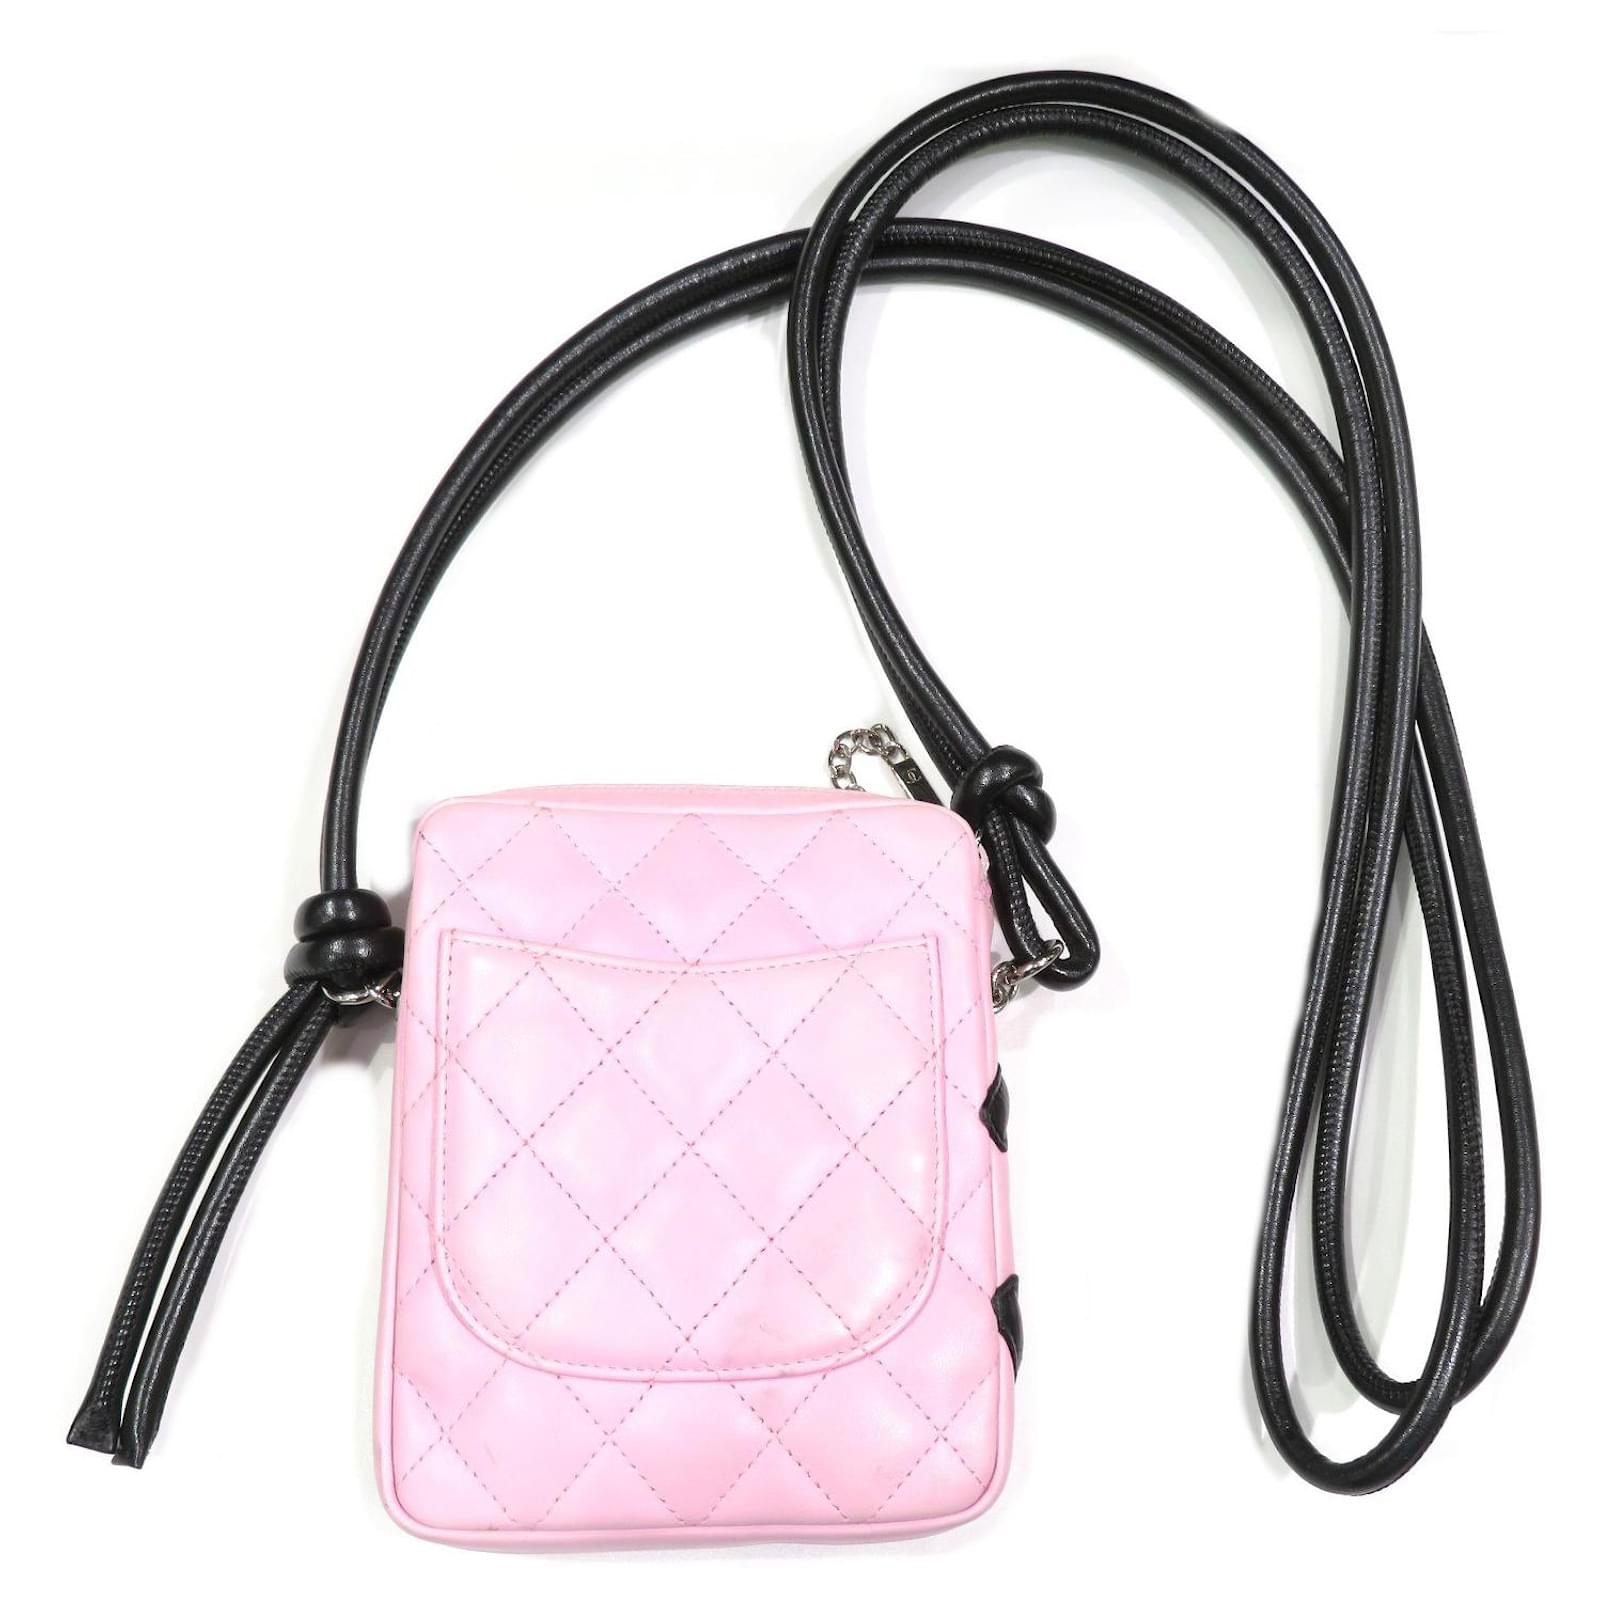 Used] CHANEL Cambon Line Pochette Shoulder Bag Pink Pony-style